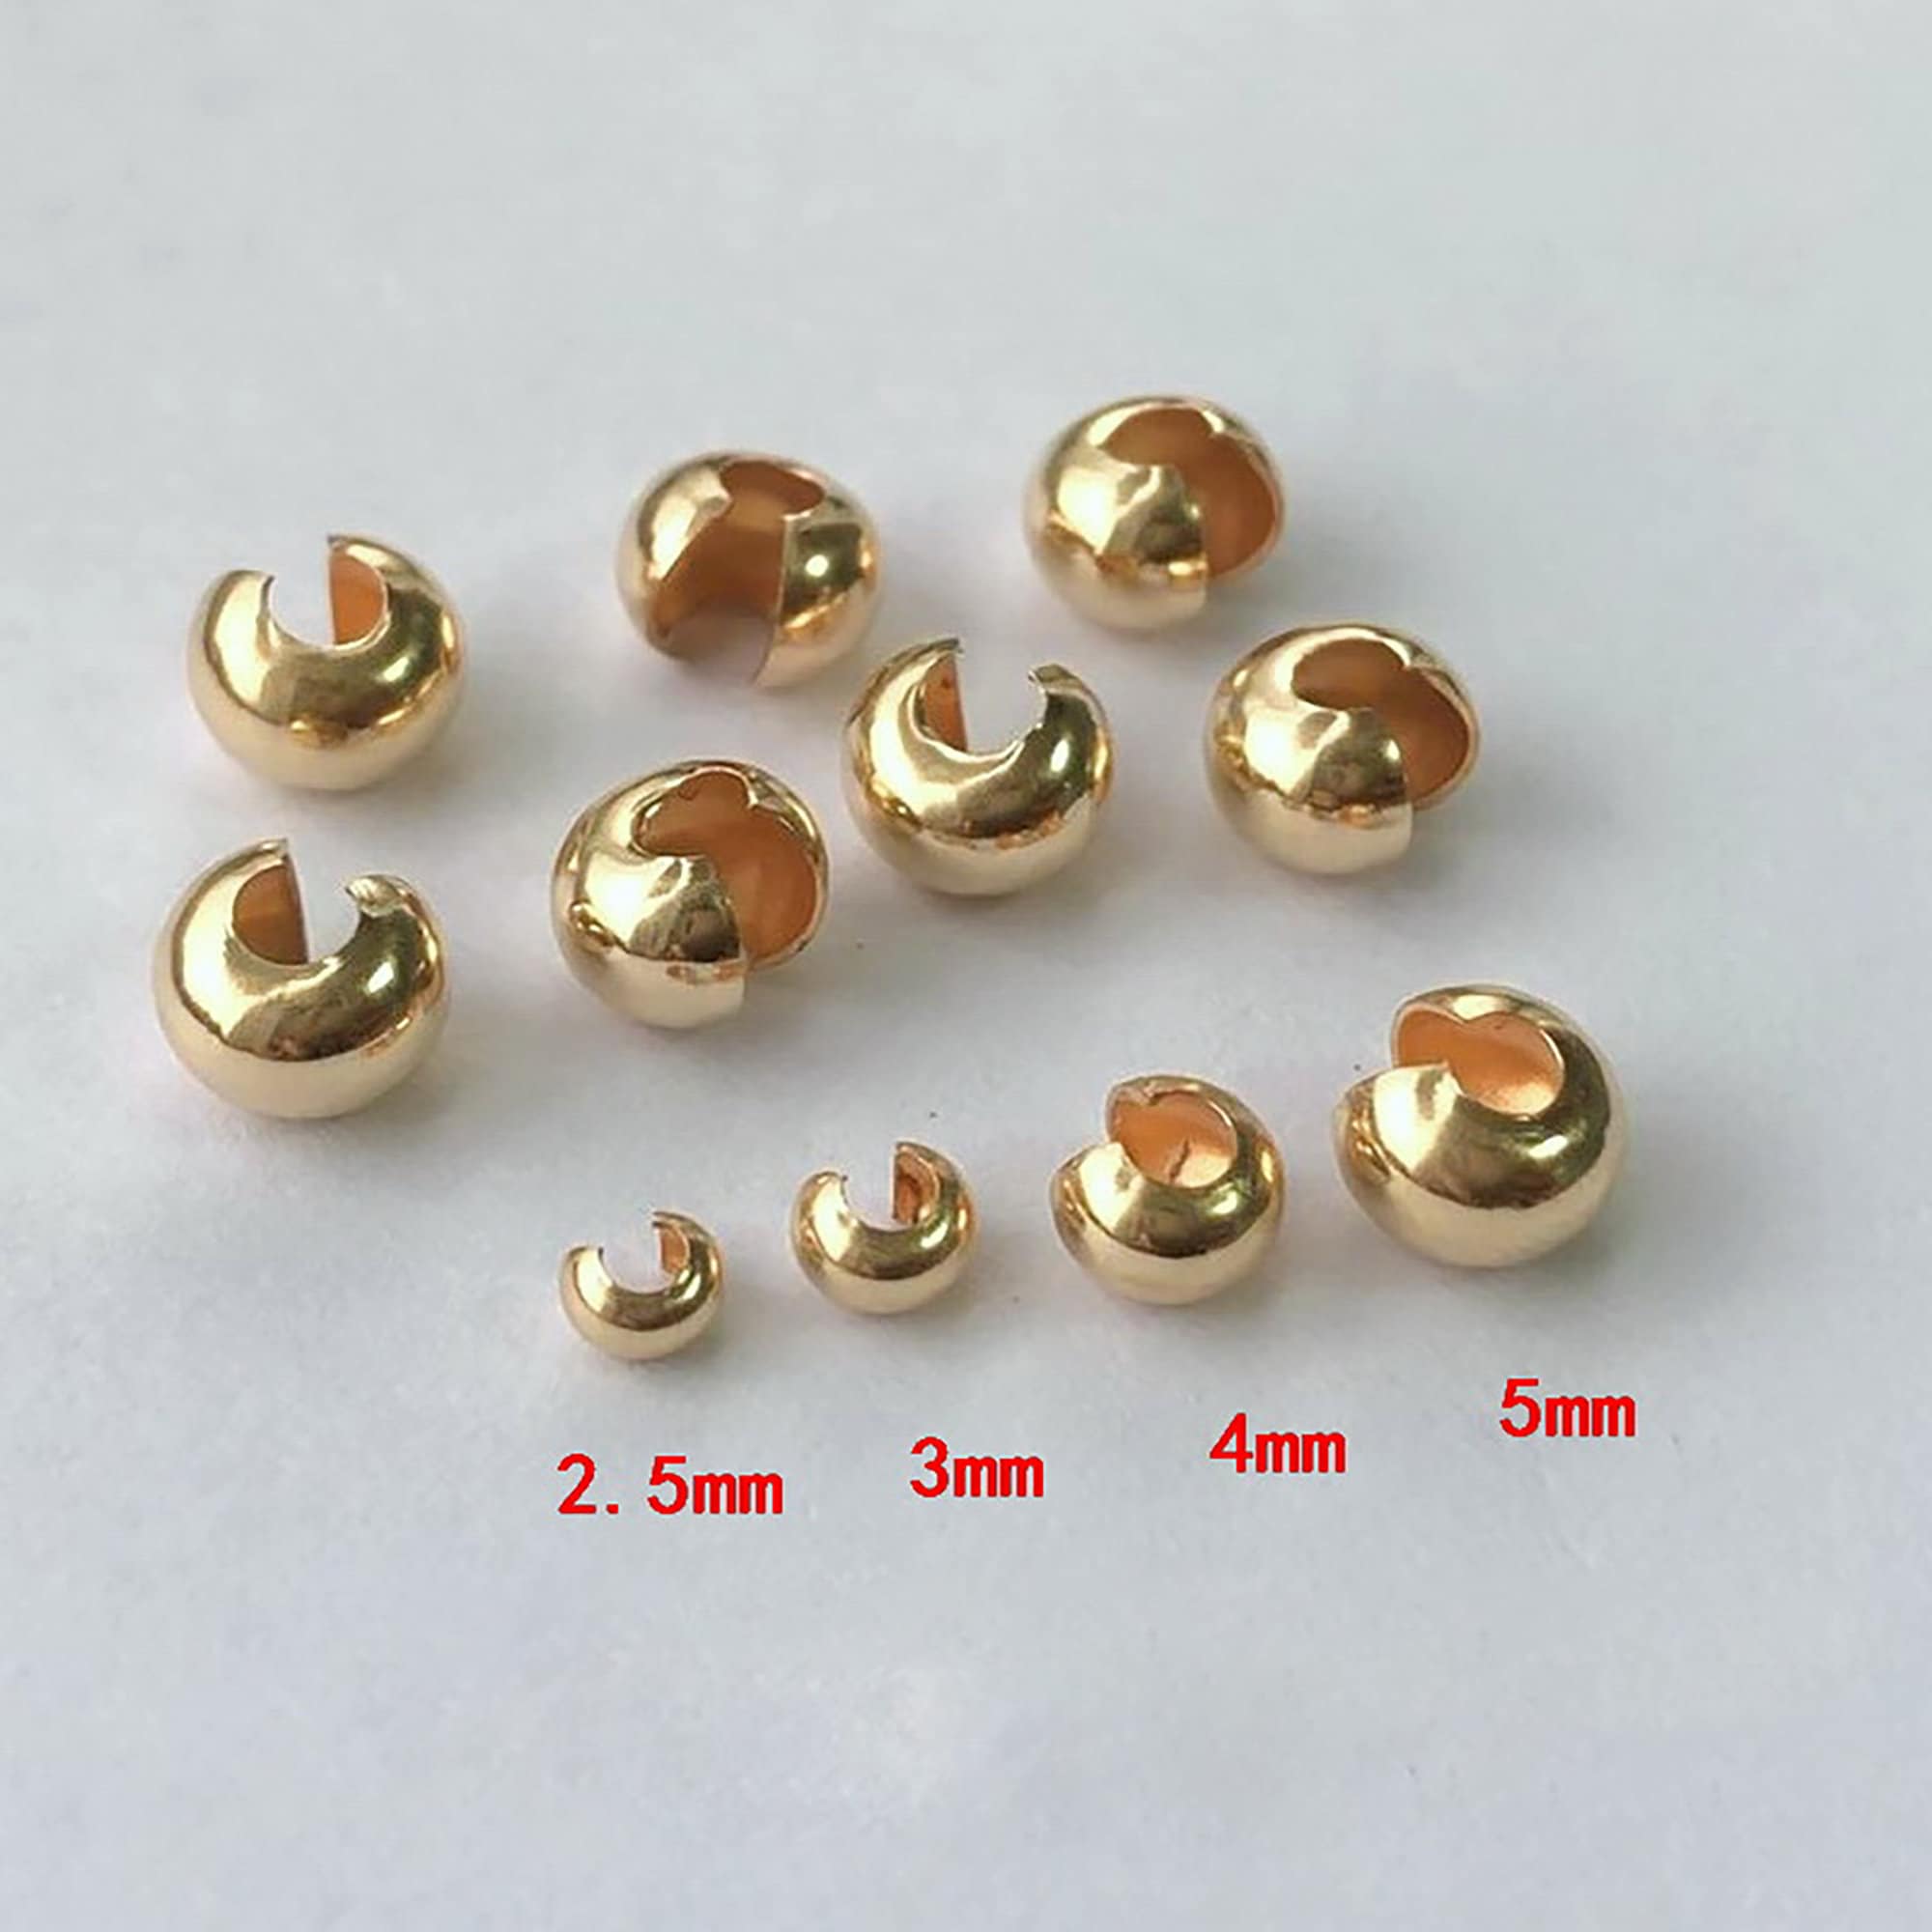 5mm 256pc Gold Bead Caps, Flower Bead Caps, Gold Plated Bali Style Caps for Jewelry  Making, Metal Bead Caps Supplies 